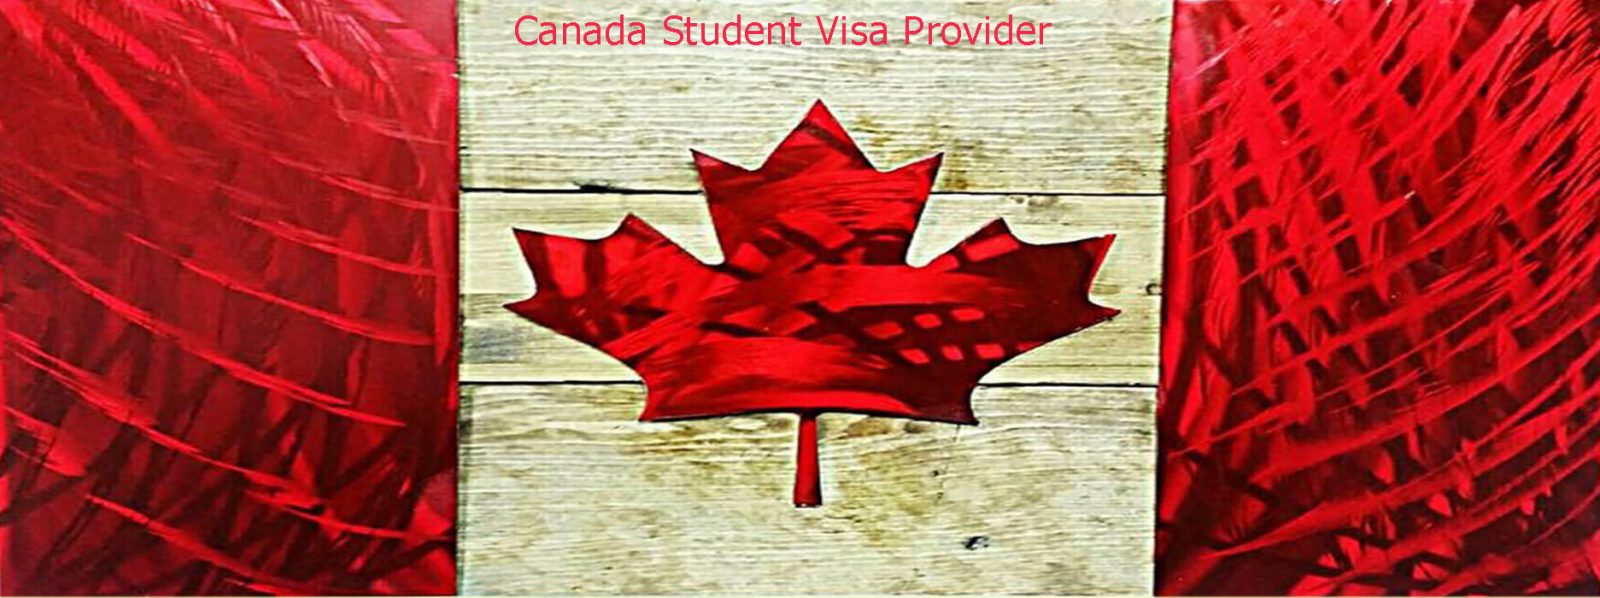 New opportunity to study in Canada-Jan. 2020.